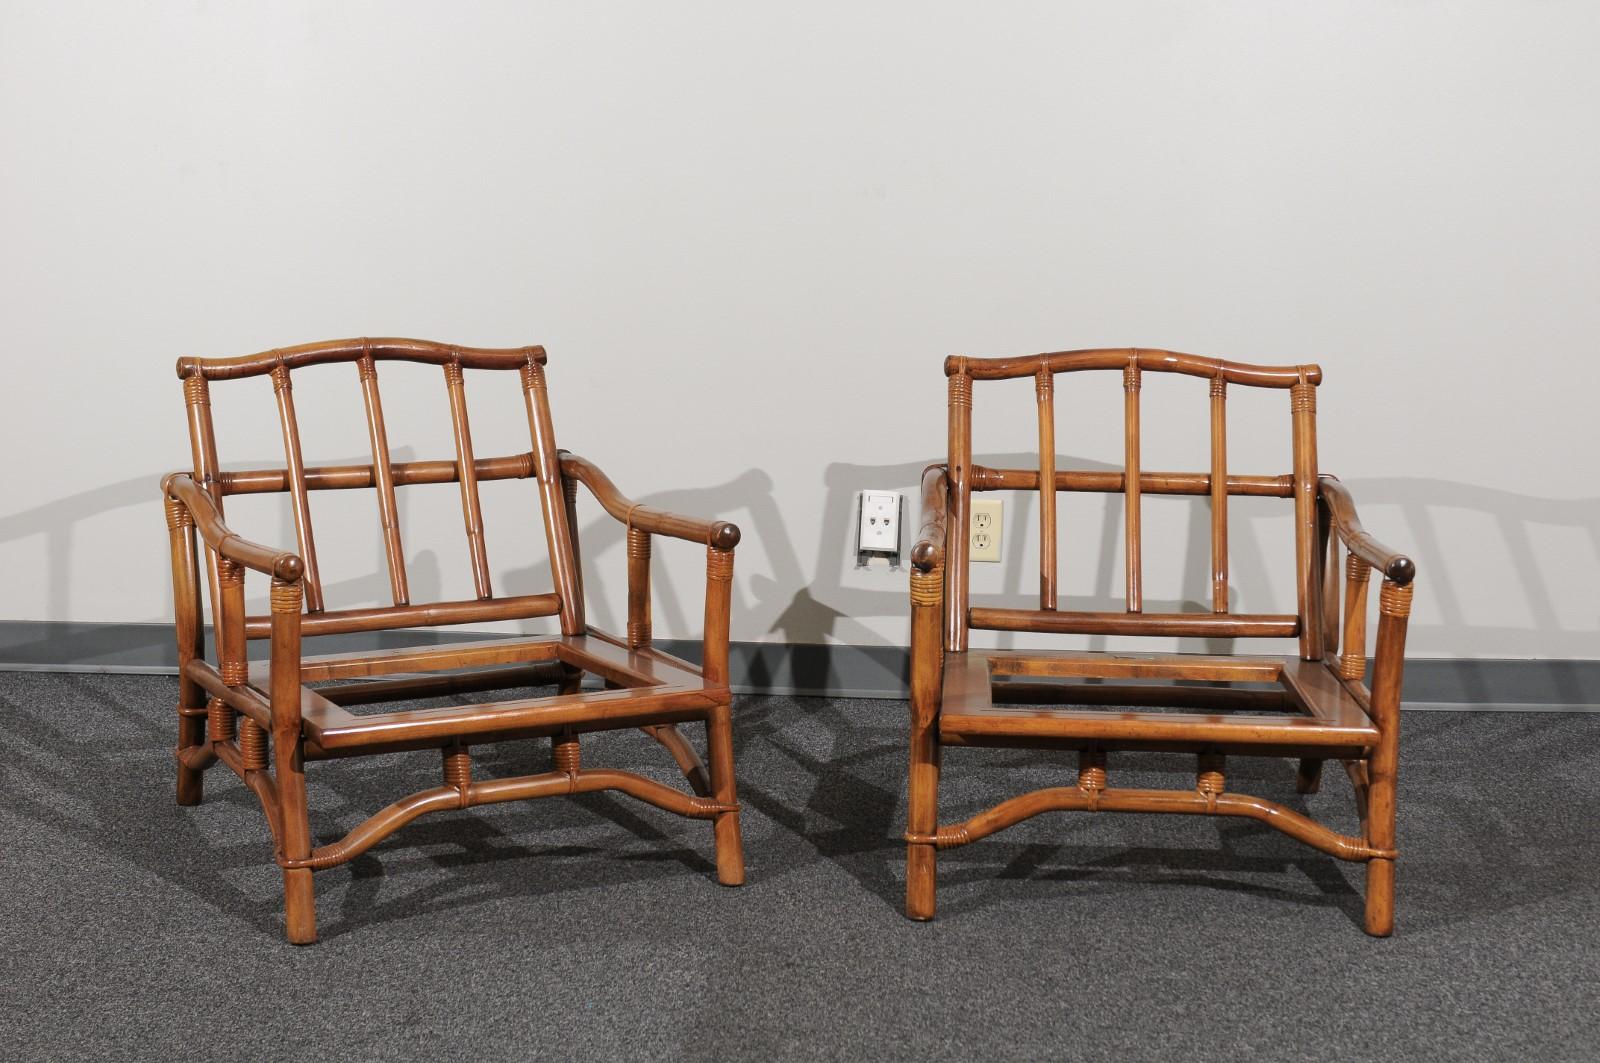 A lovely restored pair of lounge chairs from a low production series by Ficks Reed, circa 1970. Beautifully designed and expertly constructed rattan and hardwood frame with a striking Pagoda detail atop the back. Stout and comfortable. The pieces